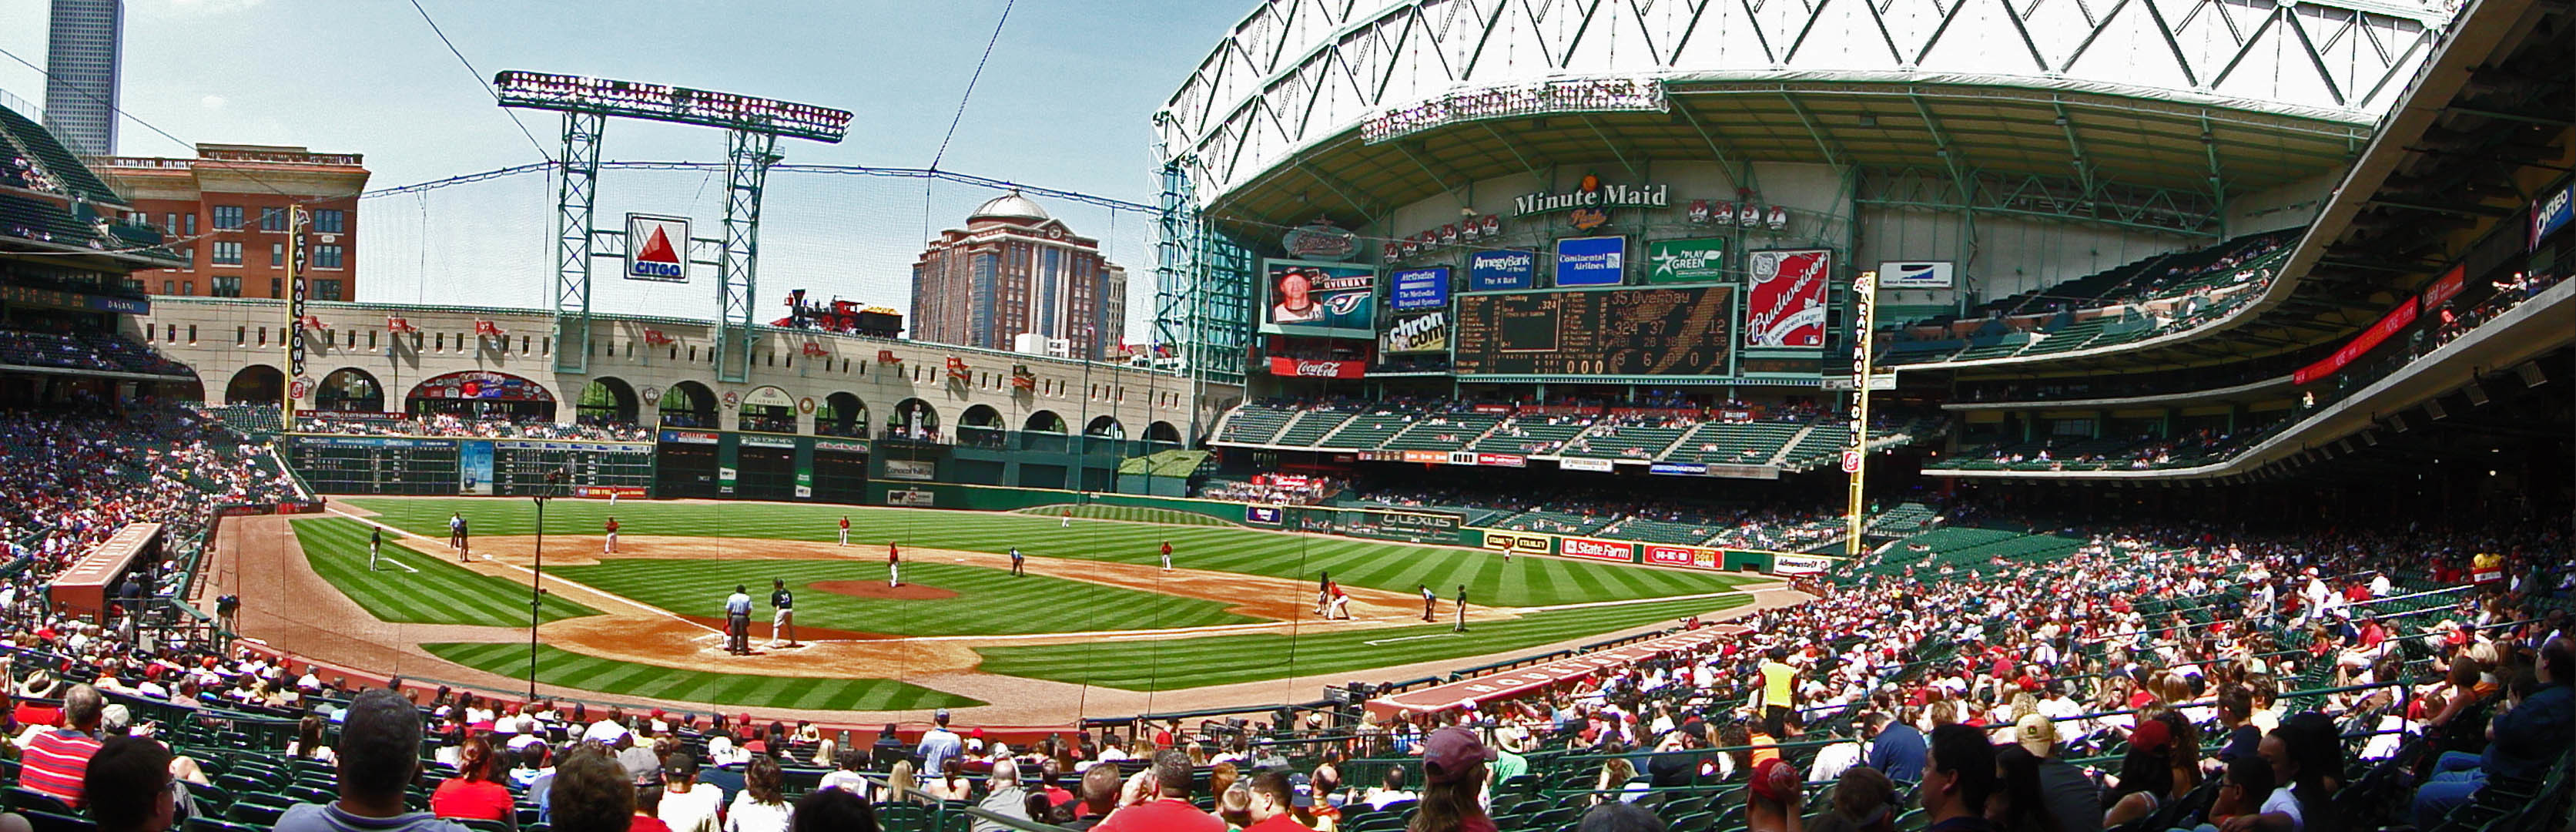 3345x1080 Easter Saturday Fanfest at Minute Maid Park.